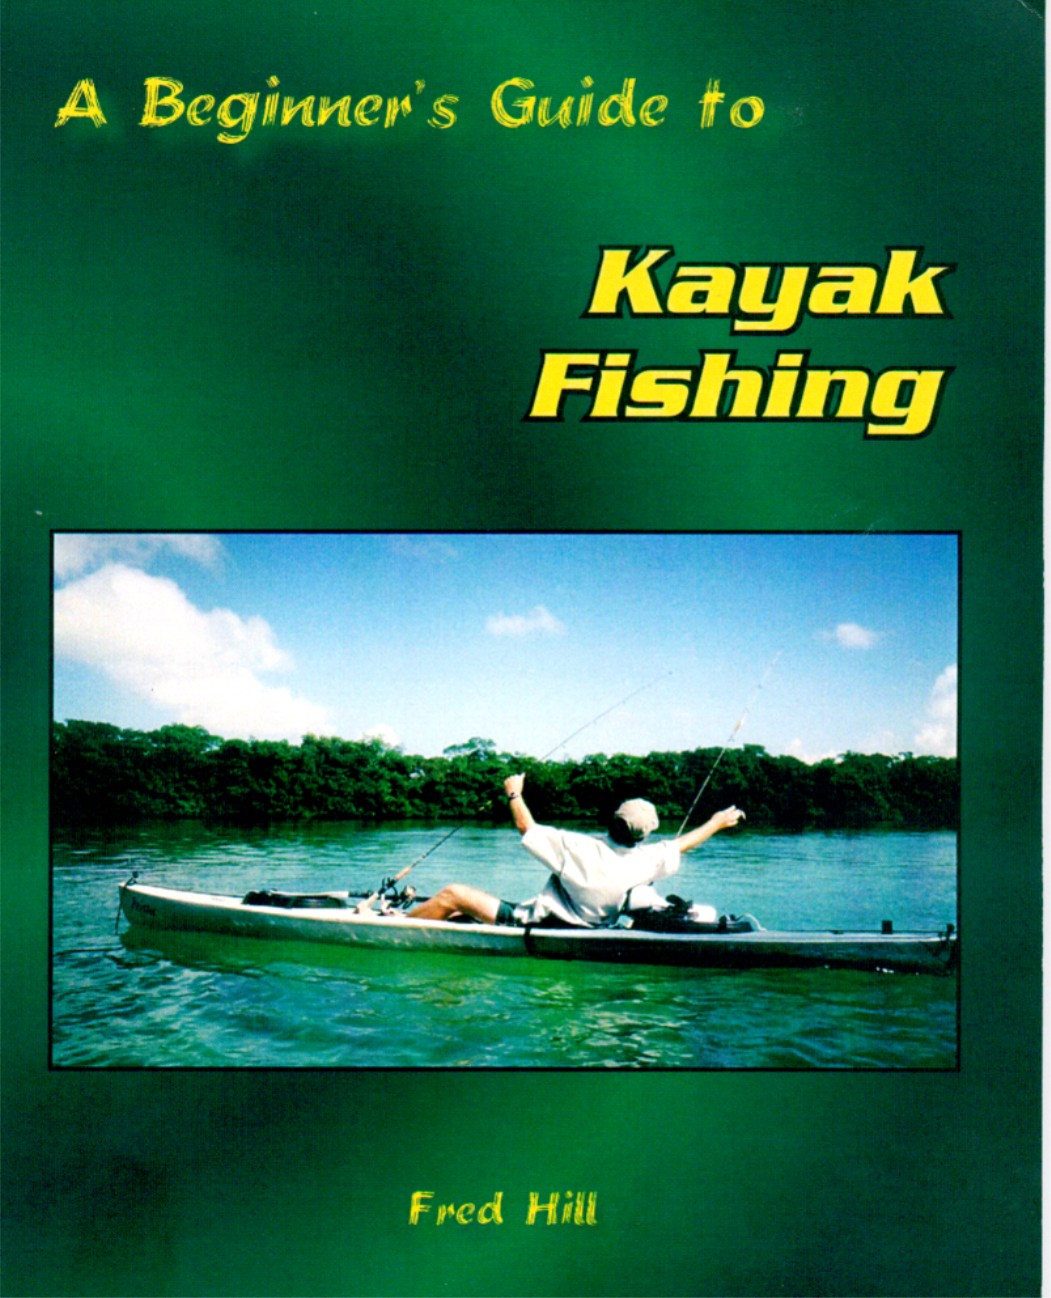 Text Box: A Beginners Guide to Kayak Fishing


